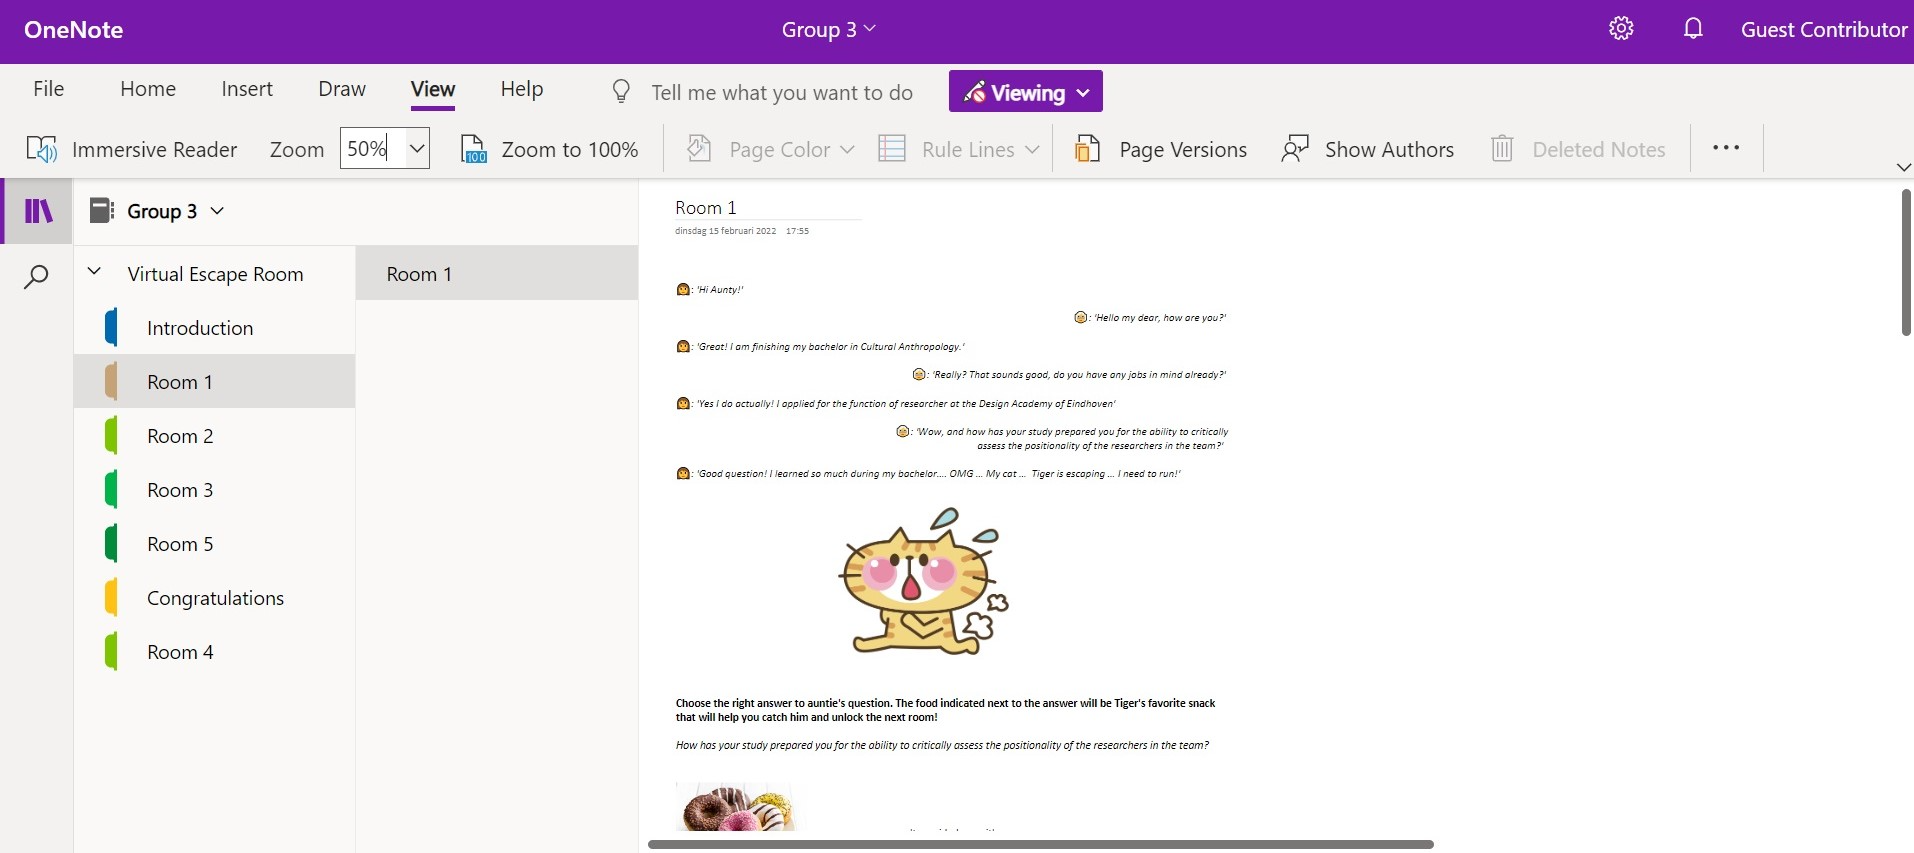 One of the escape rooms created by the students in OneNote (Room 1)